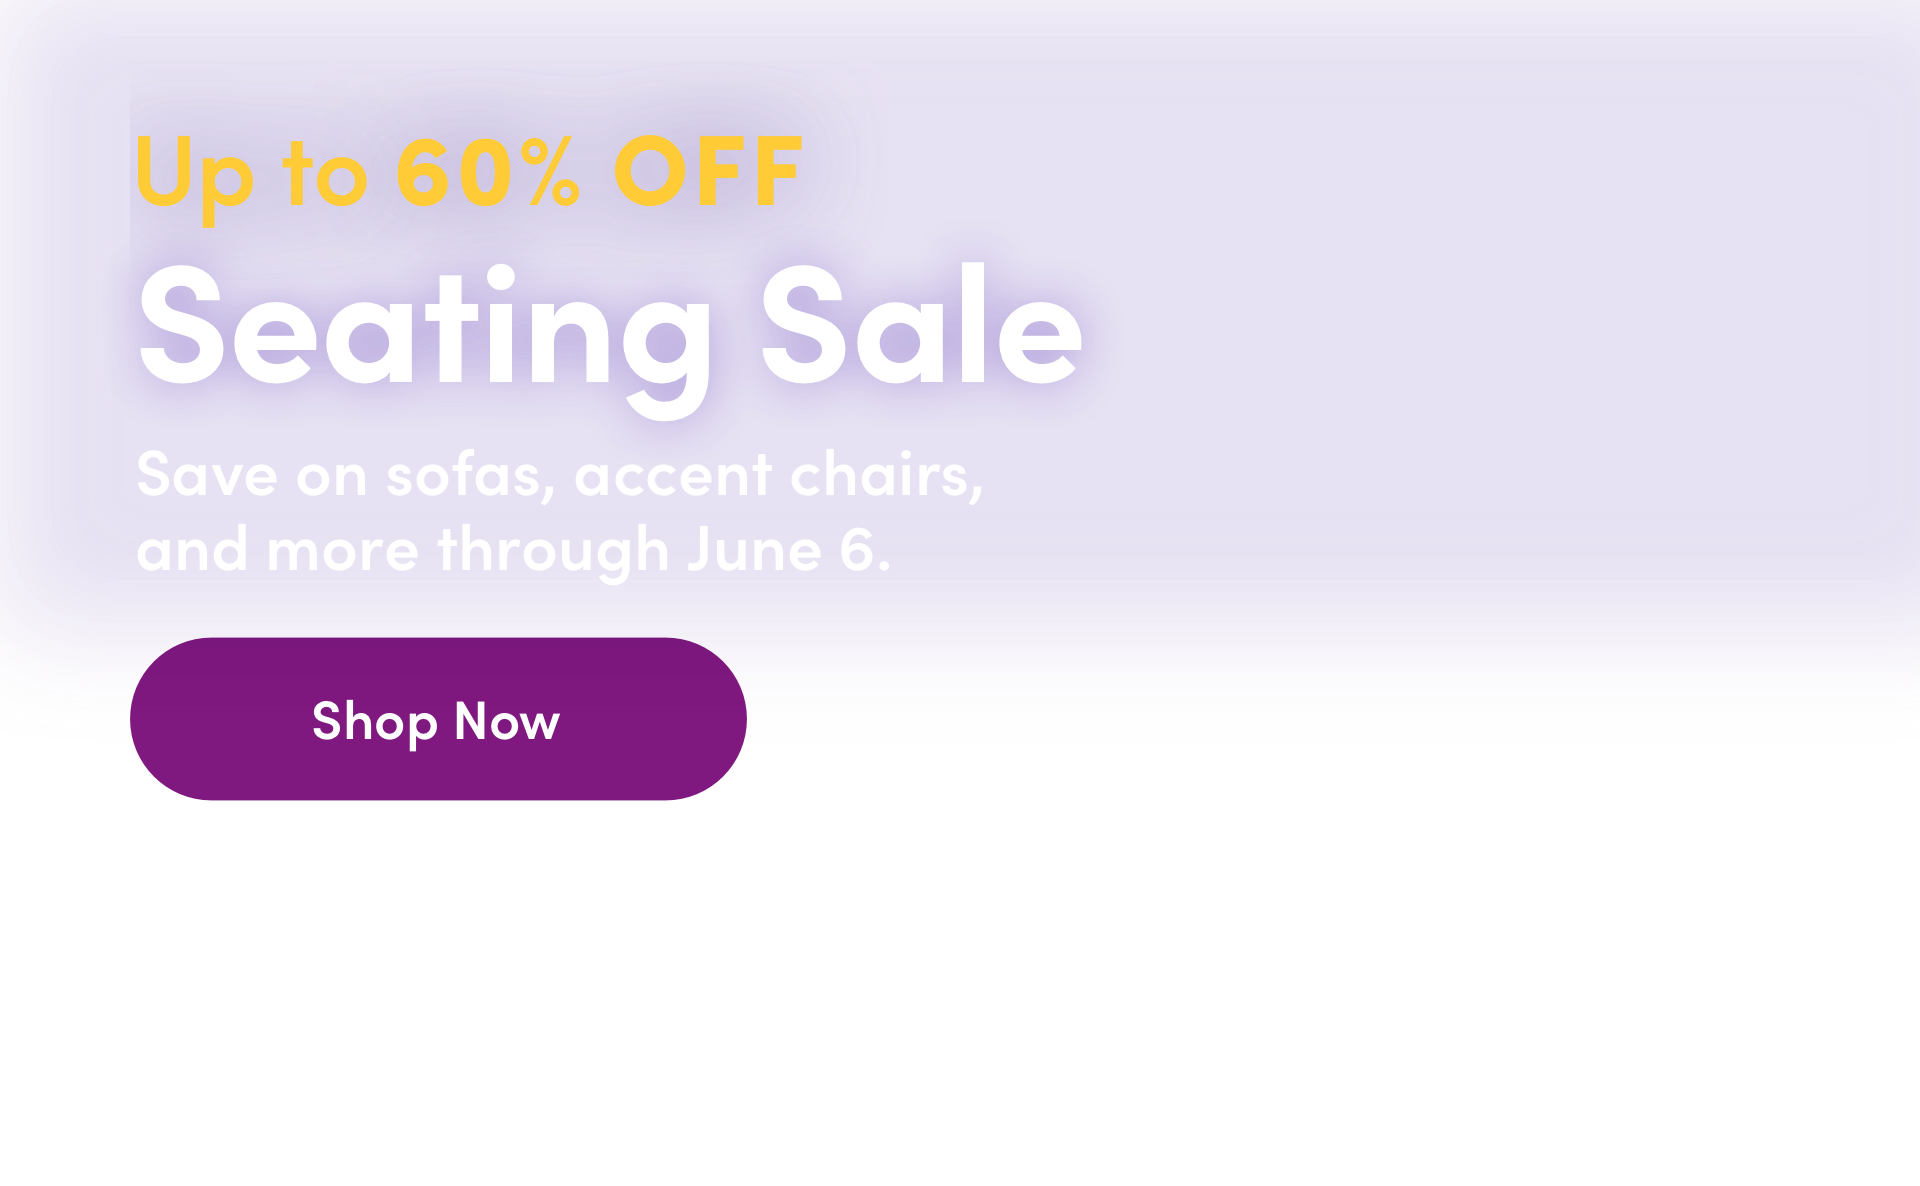 Up to 60% OFF Seating Sale Save on sofas, accent chairs, and more through June 6. Shop Now